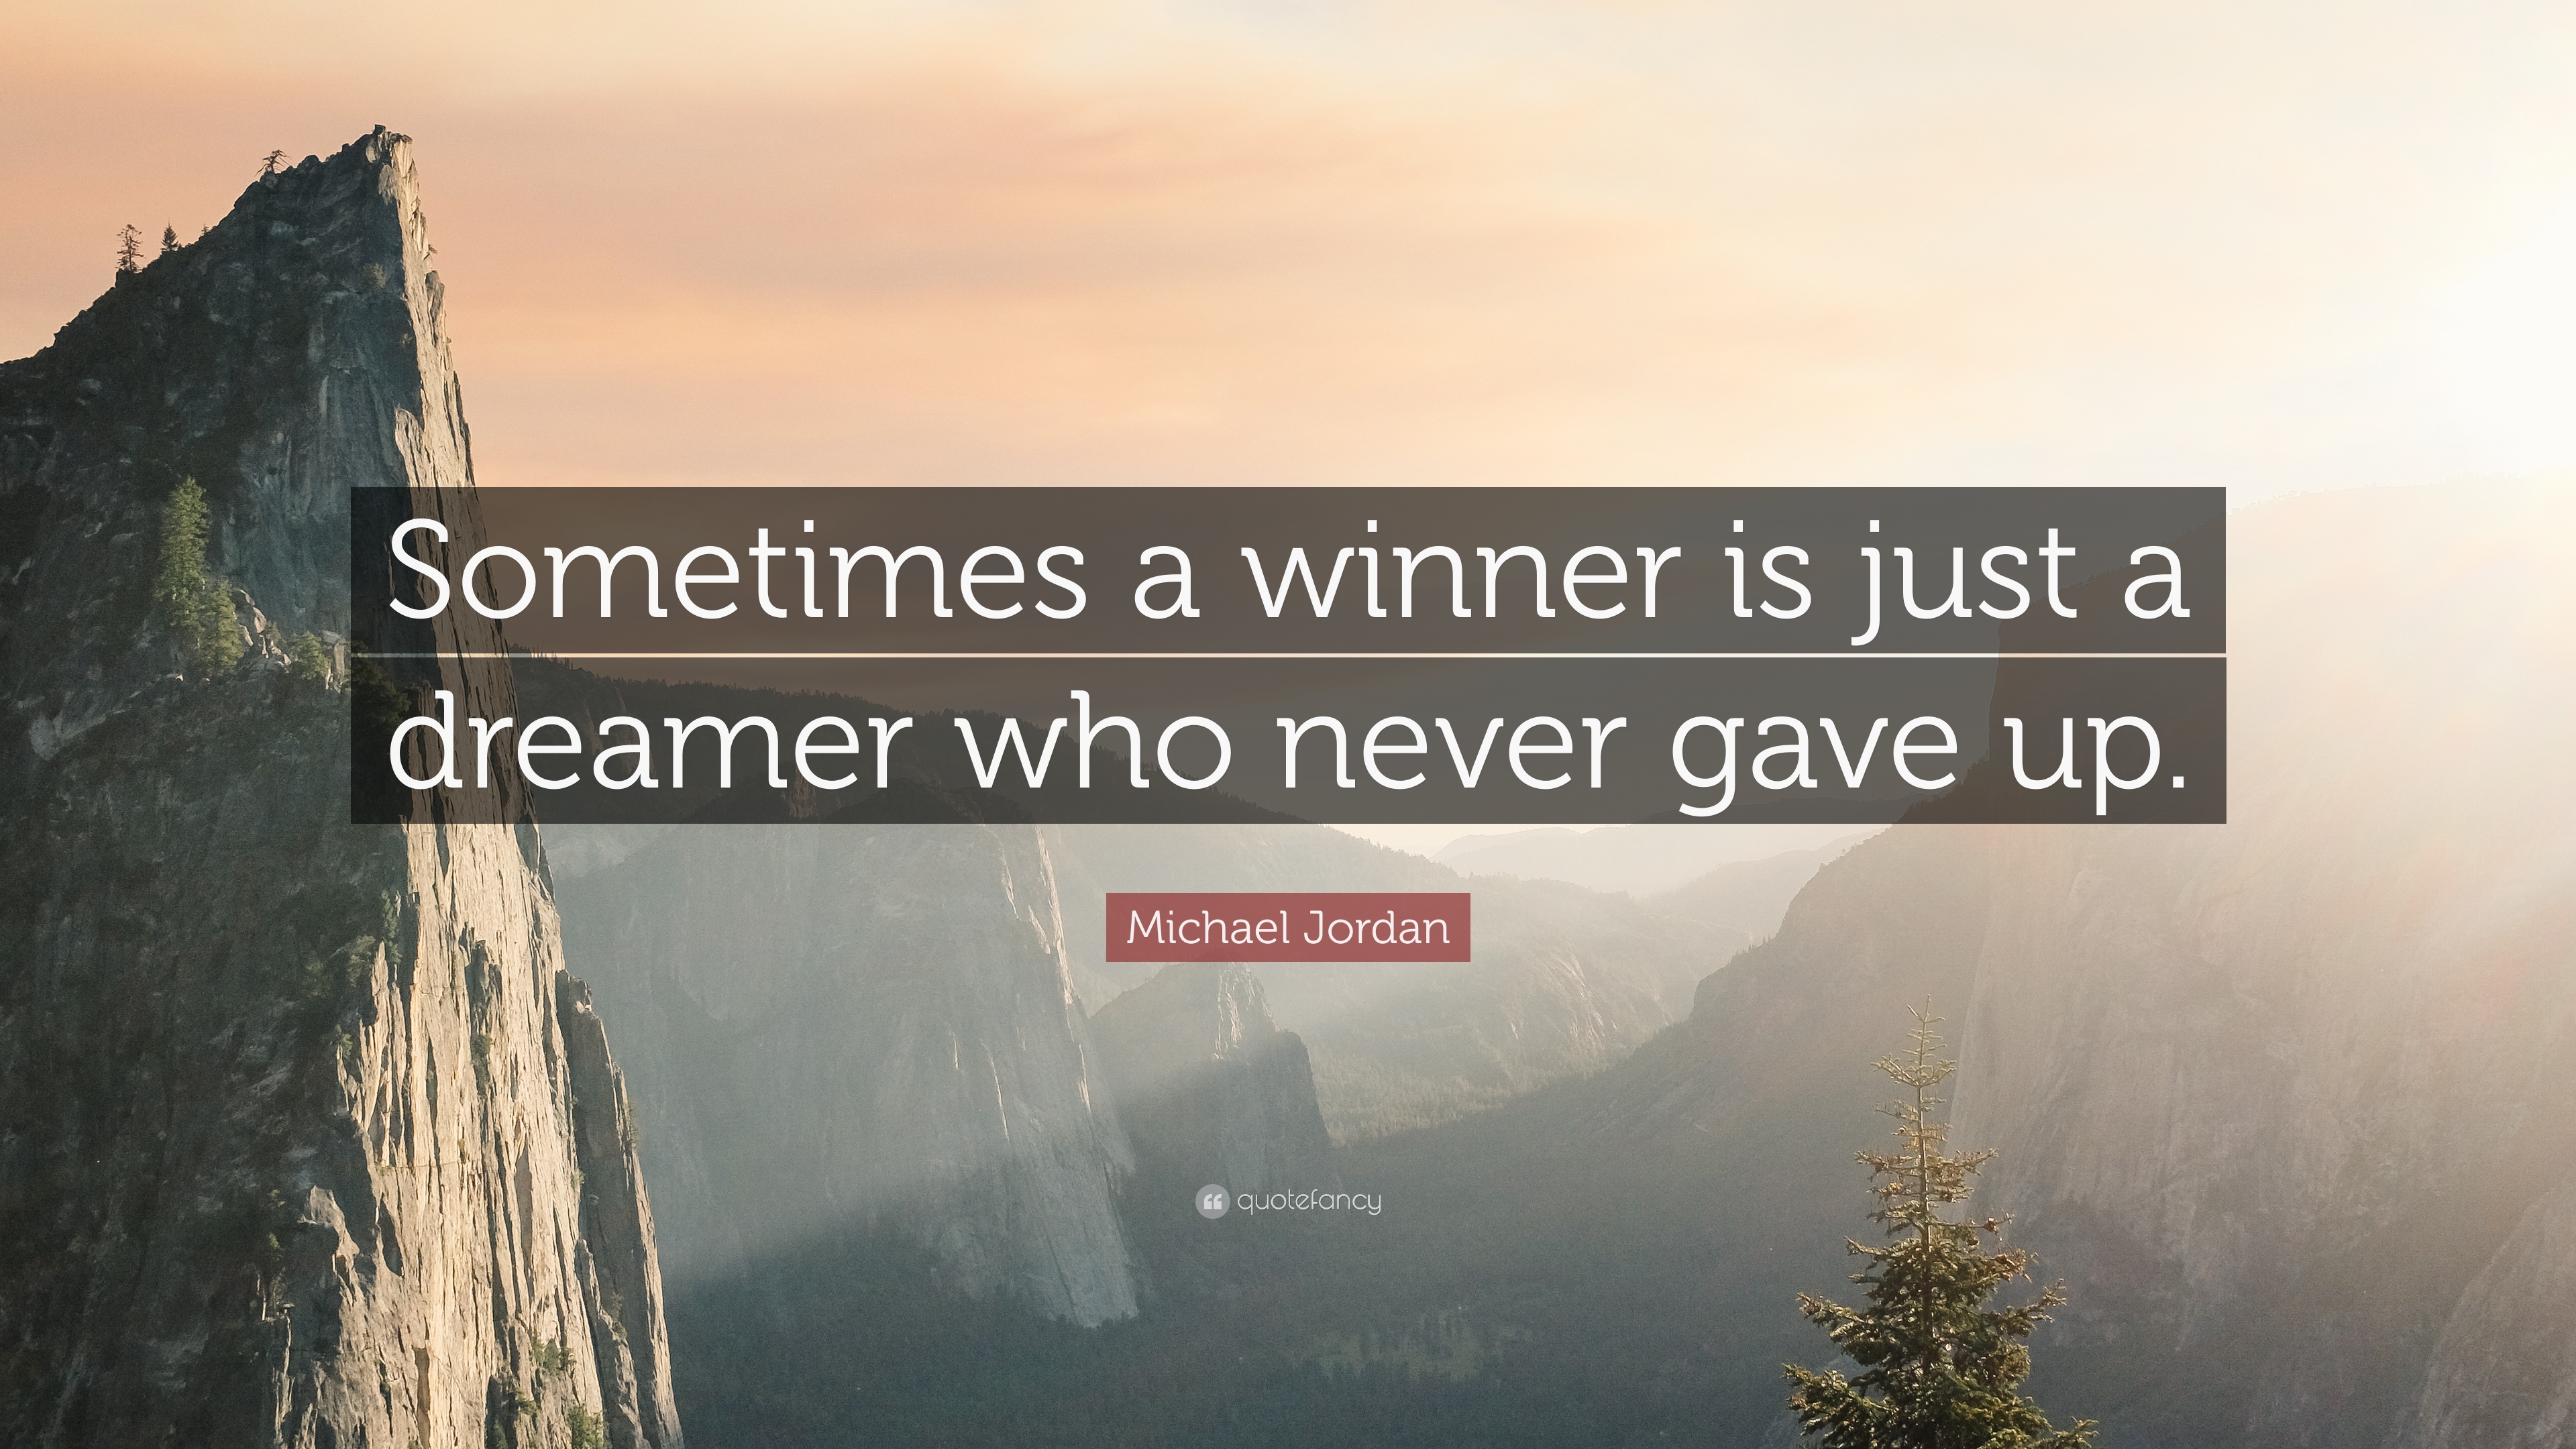 Michael Jordan Quote: “Sometimes a winner is just a dreamer who never gave up.”